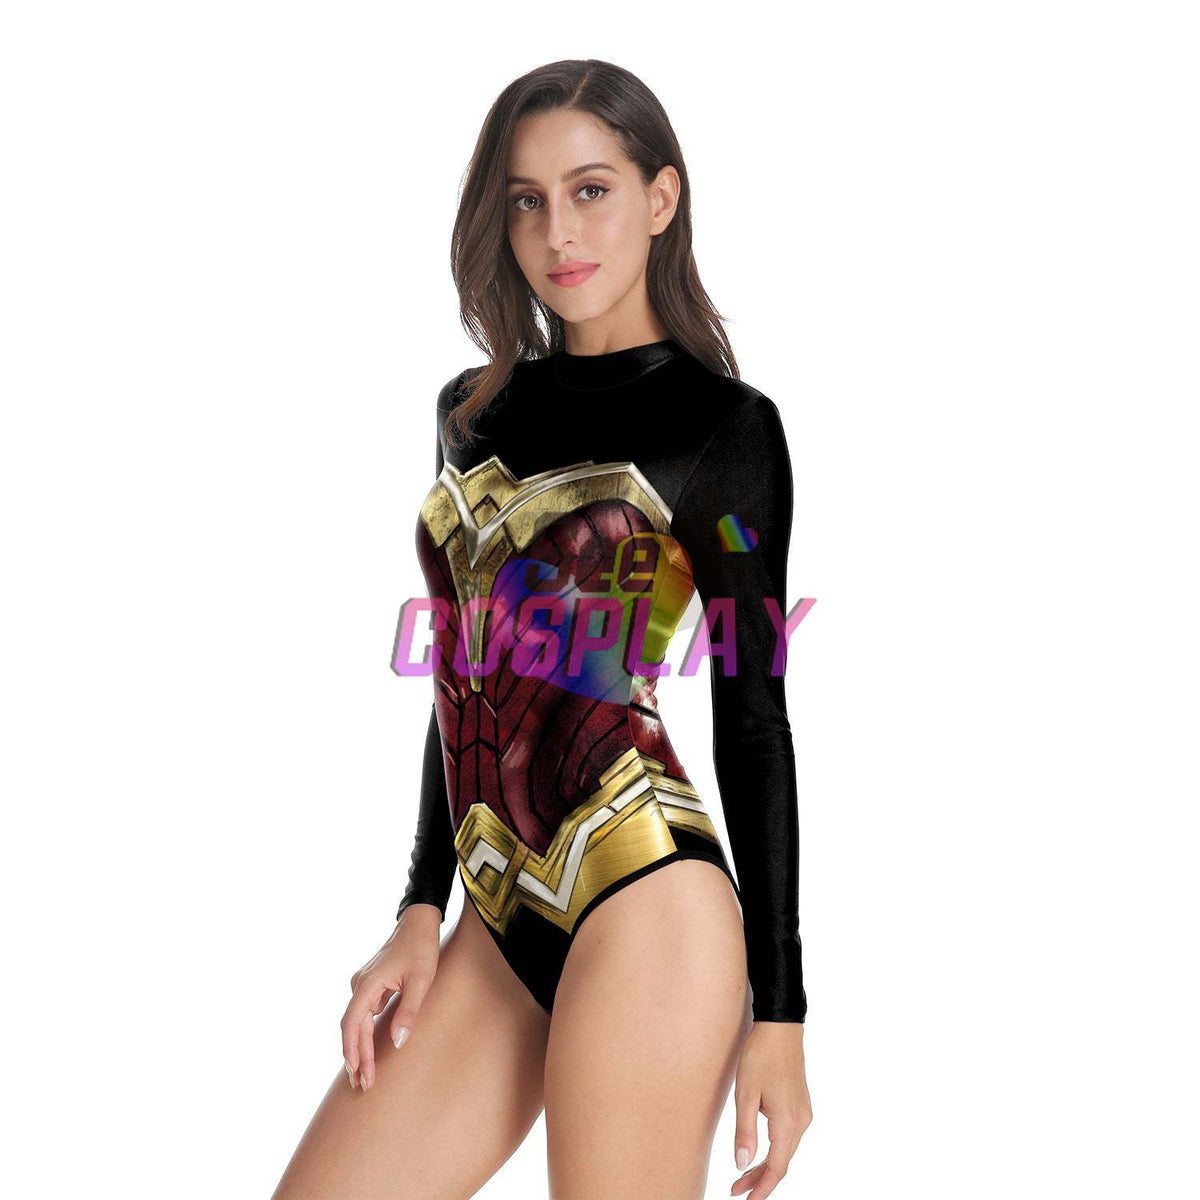 Justice League Series Cosplay Female Superman Hero Dress up Performance Costume Long Sleeve Swimsuit Female